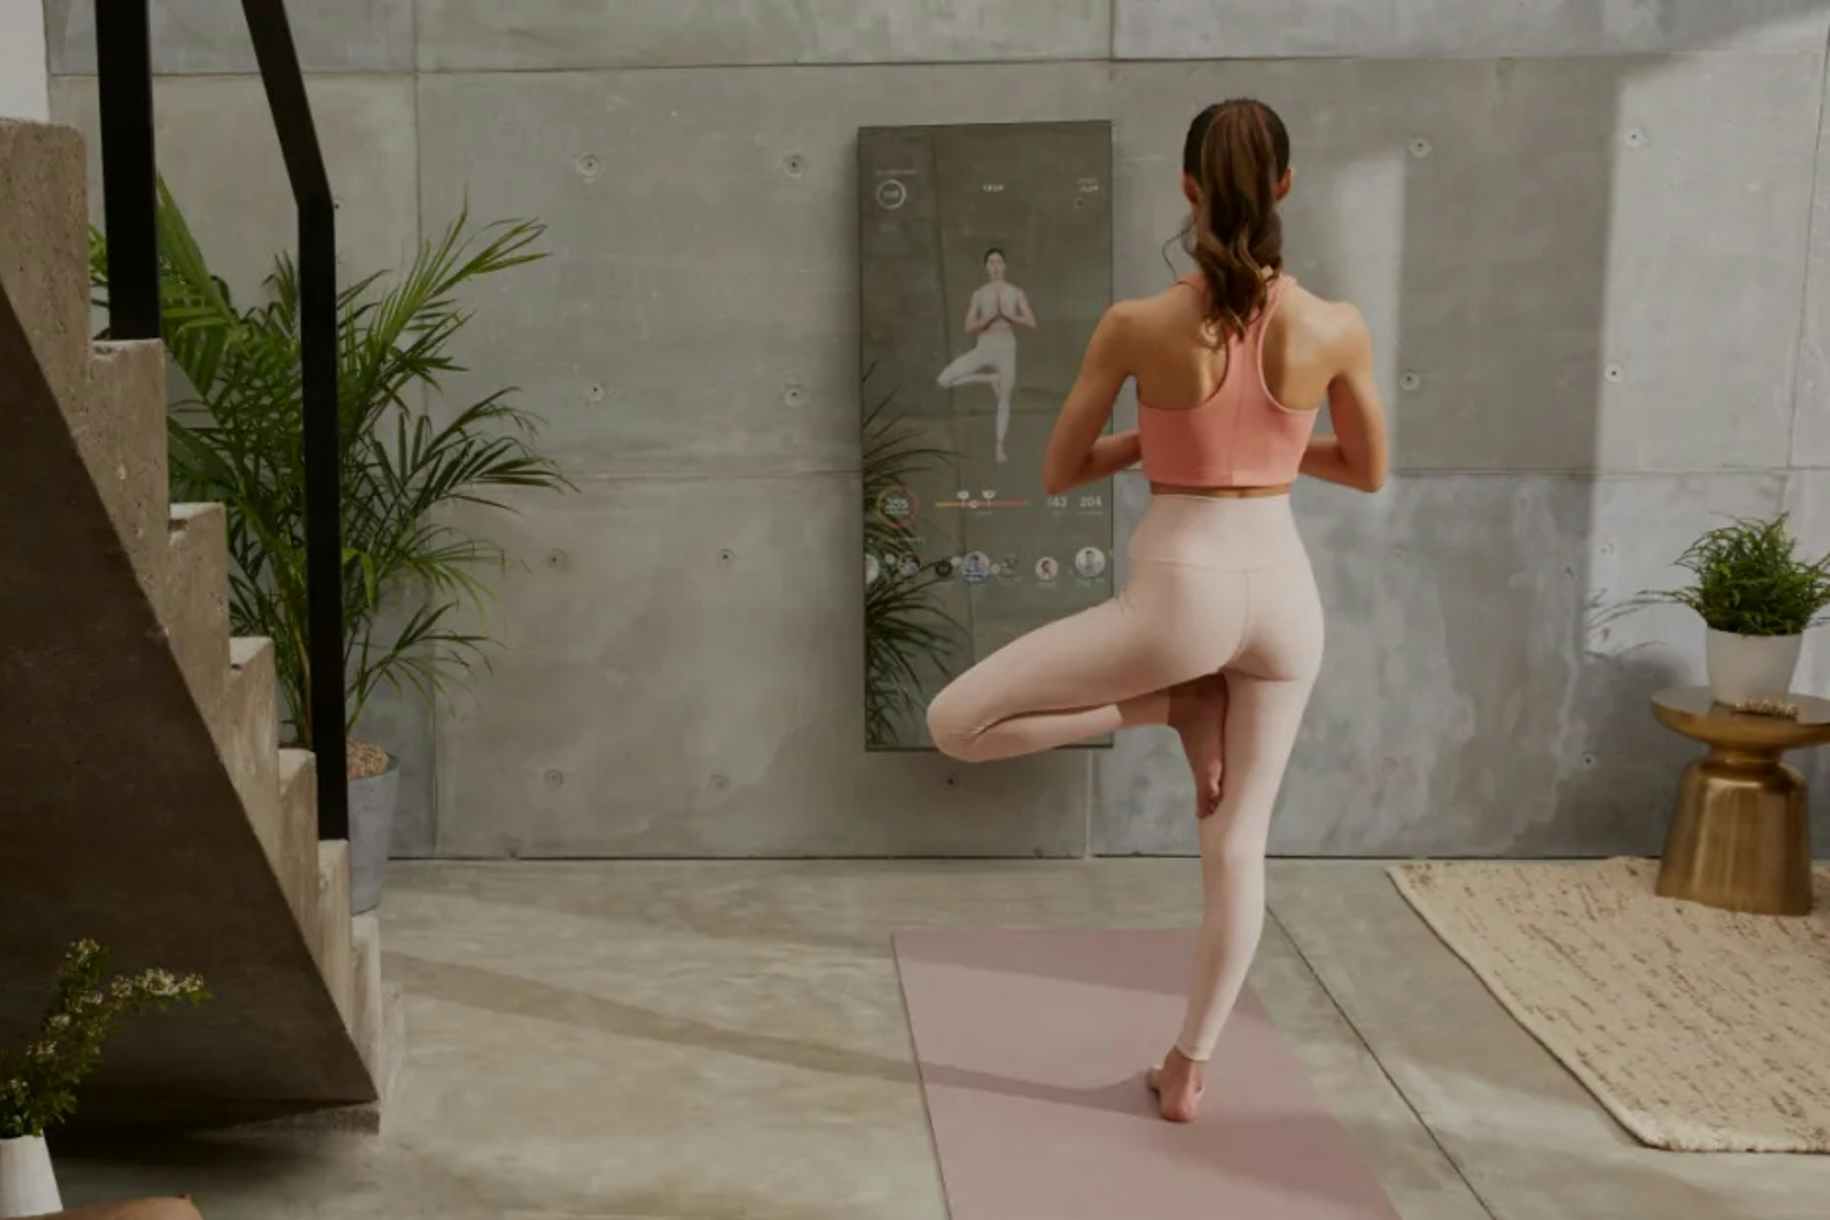 A person doing a yoga pose in front of a Lululemon studio mirror.